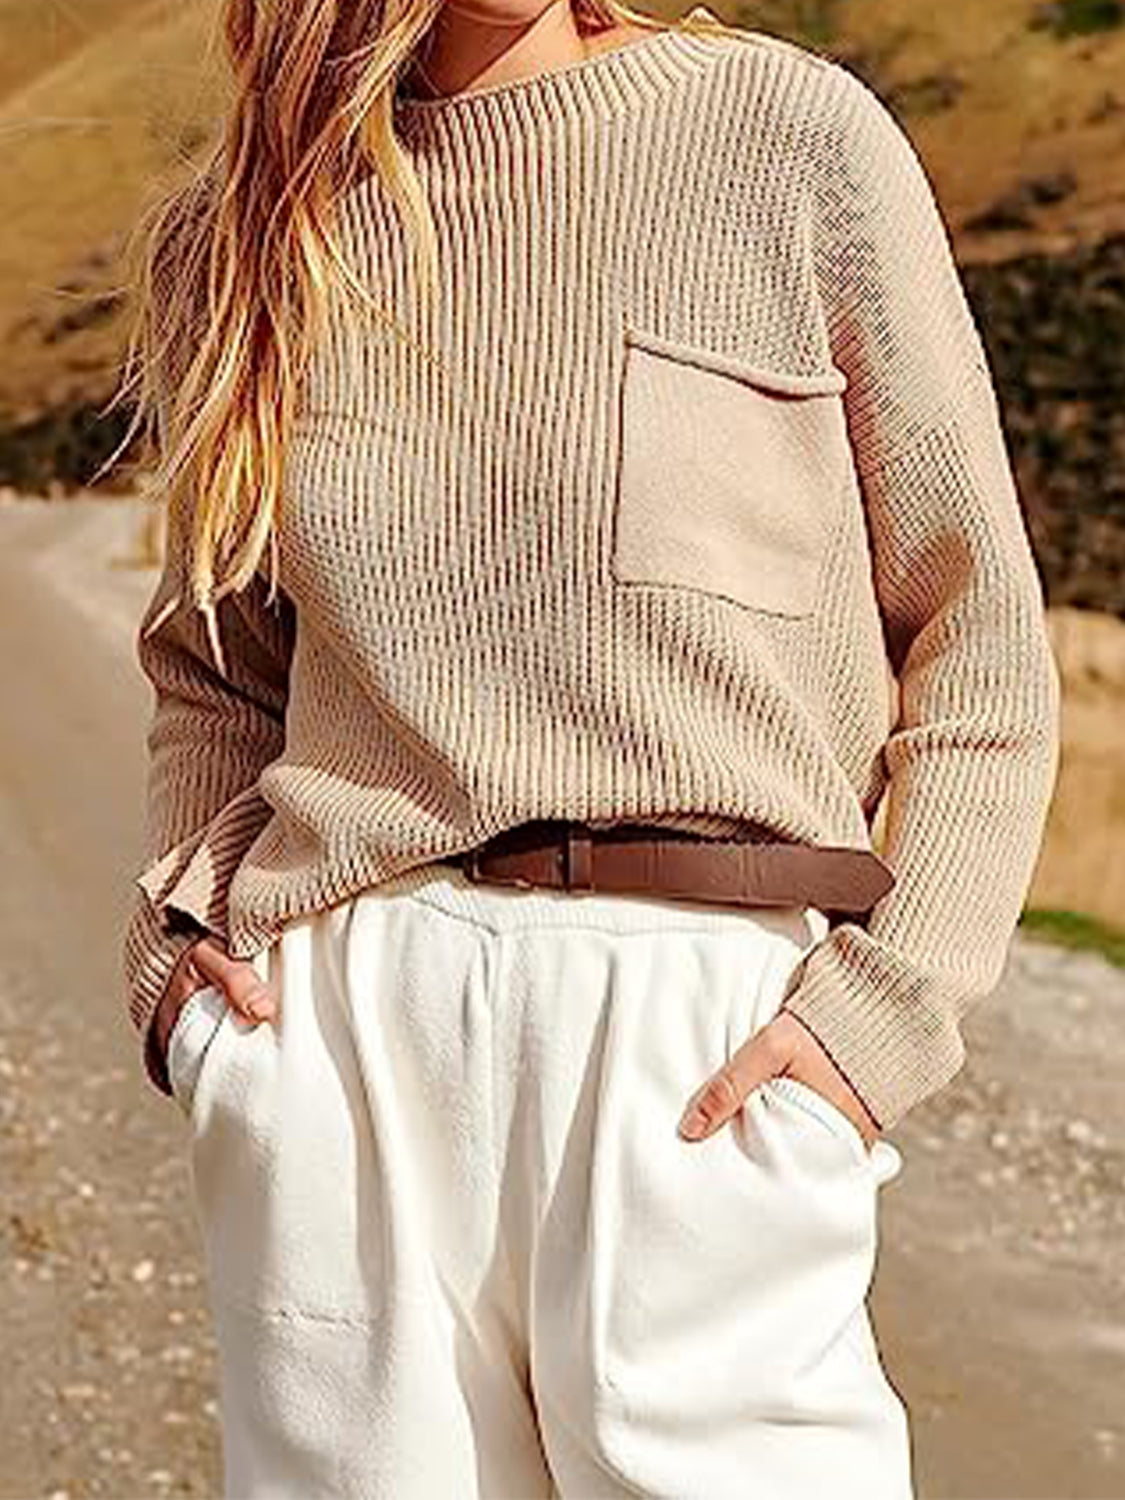 Rosy Brown Knit Top and Joggers Set Sentient Beauty Fashions Apparel & Accessories